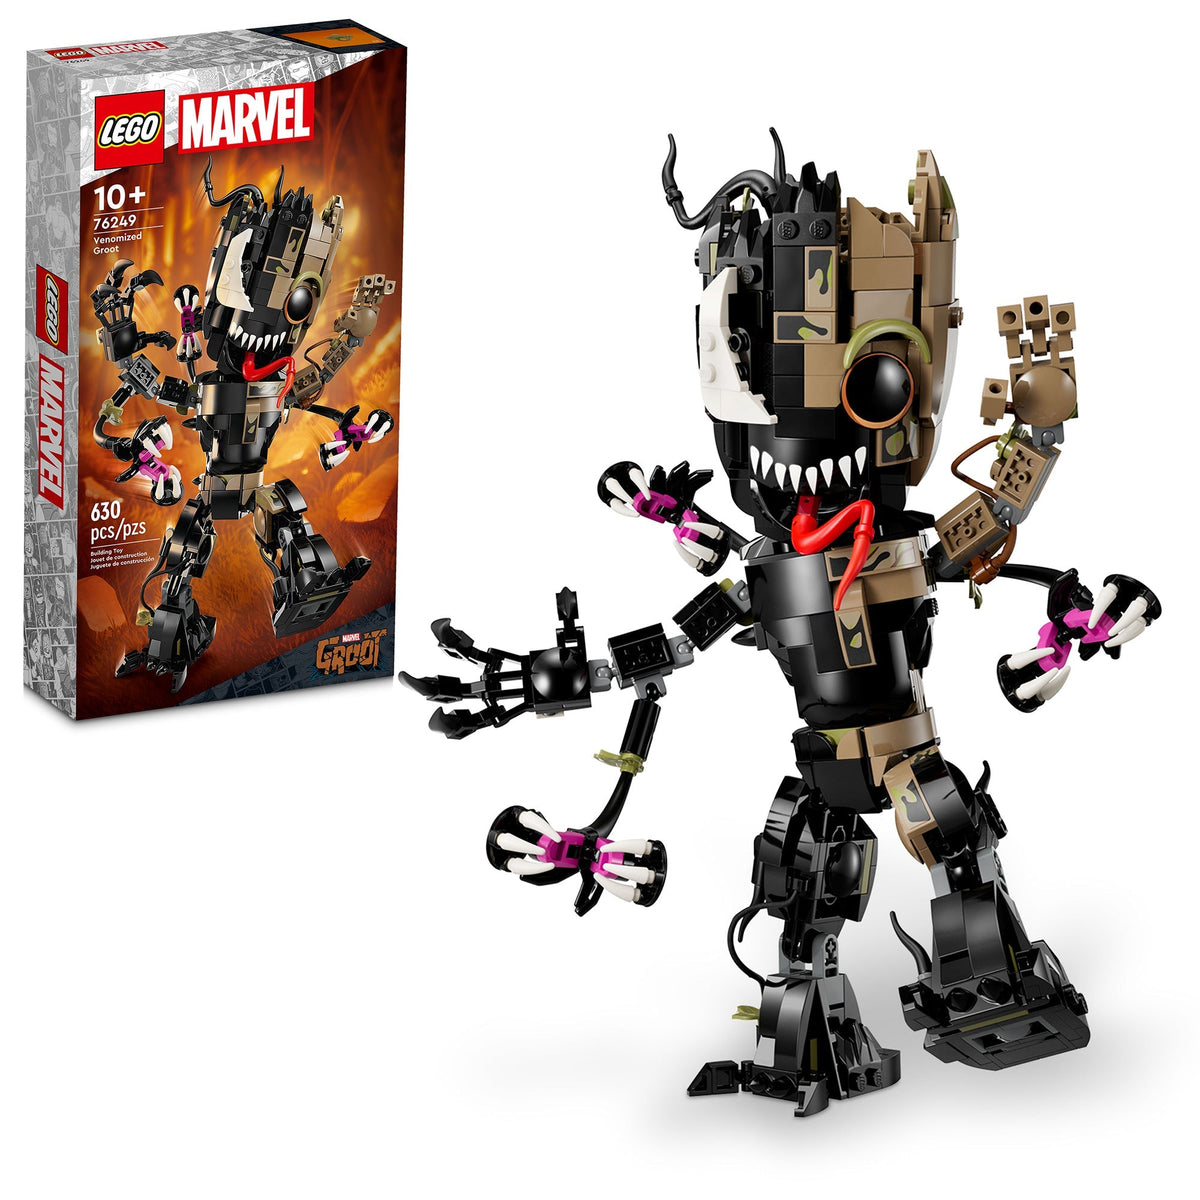 LEGO Toys & Games LEGO Marvel Venomized Groot, 76249, Ages 10+, 630 Pieces